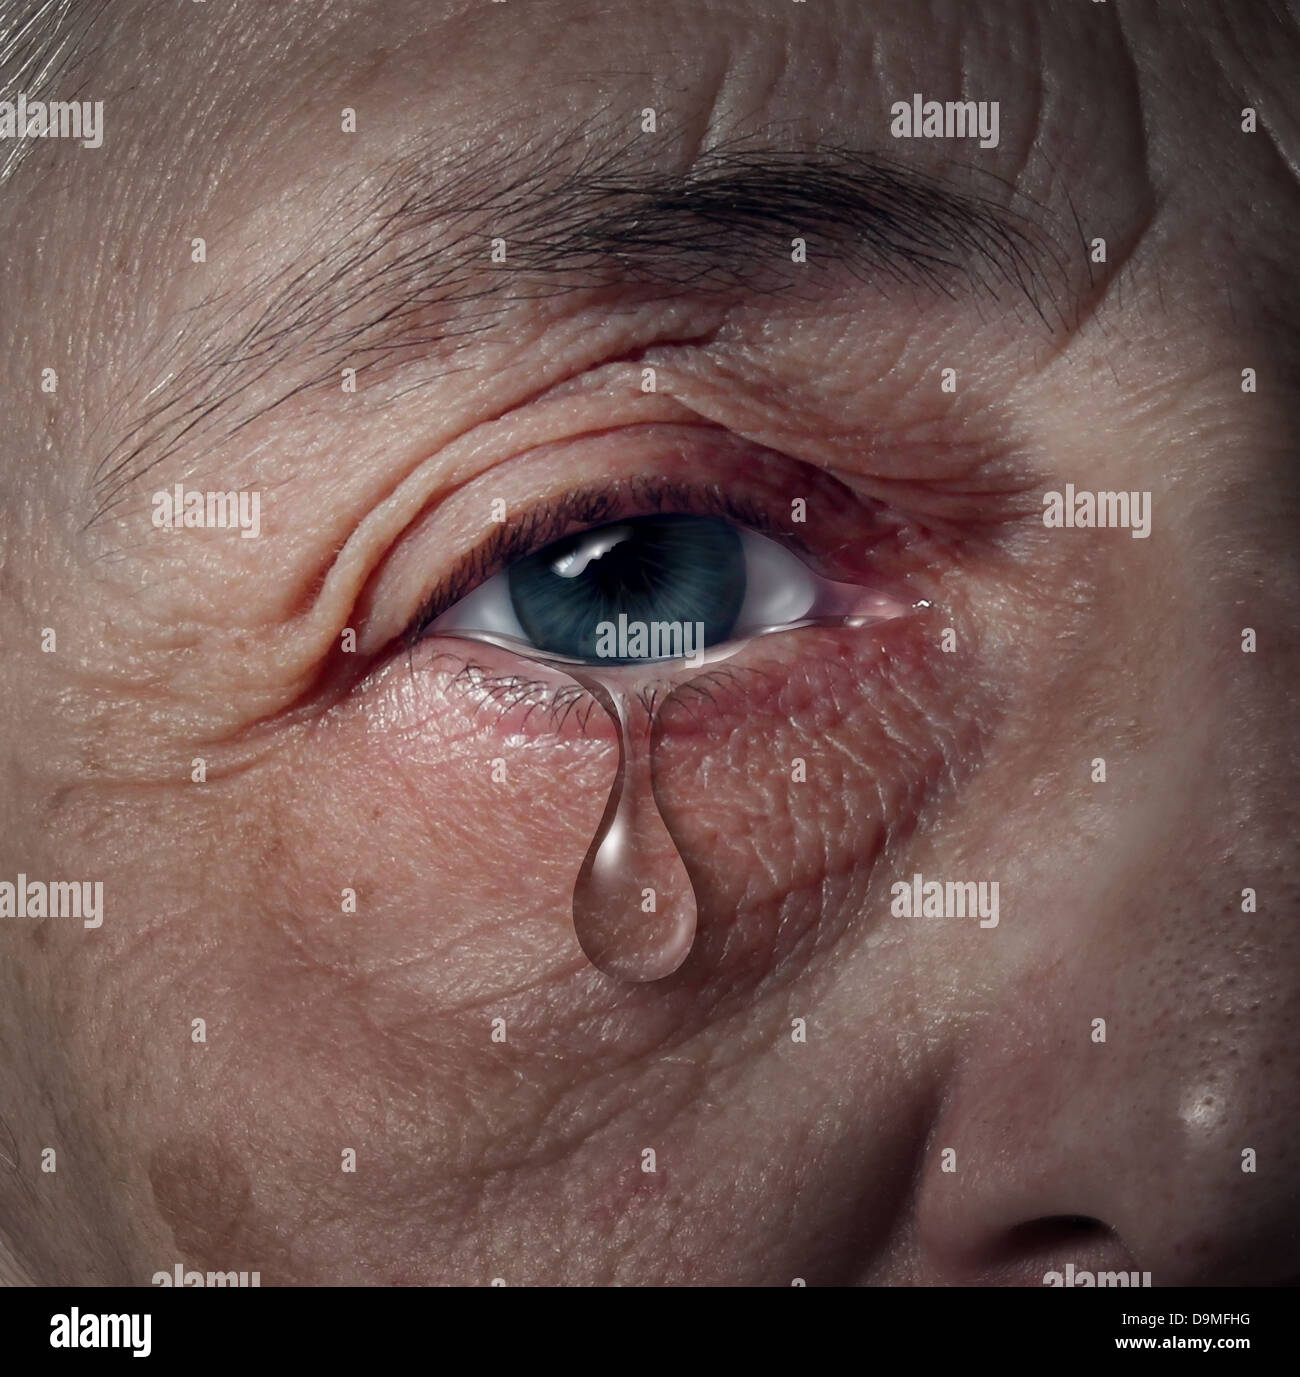 Senior depression and elderly mental health issues related to loneliness and emotional illness based on grief or chemical imbalance causing anxiety as a close up of an aging human eye crying a tear drop. Stock Photo